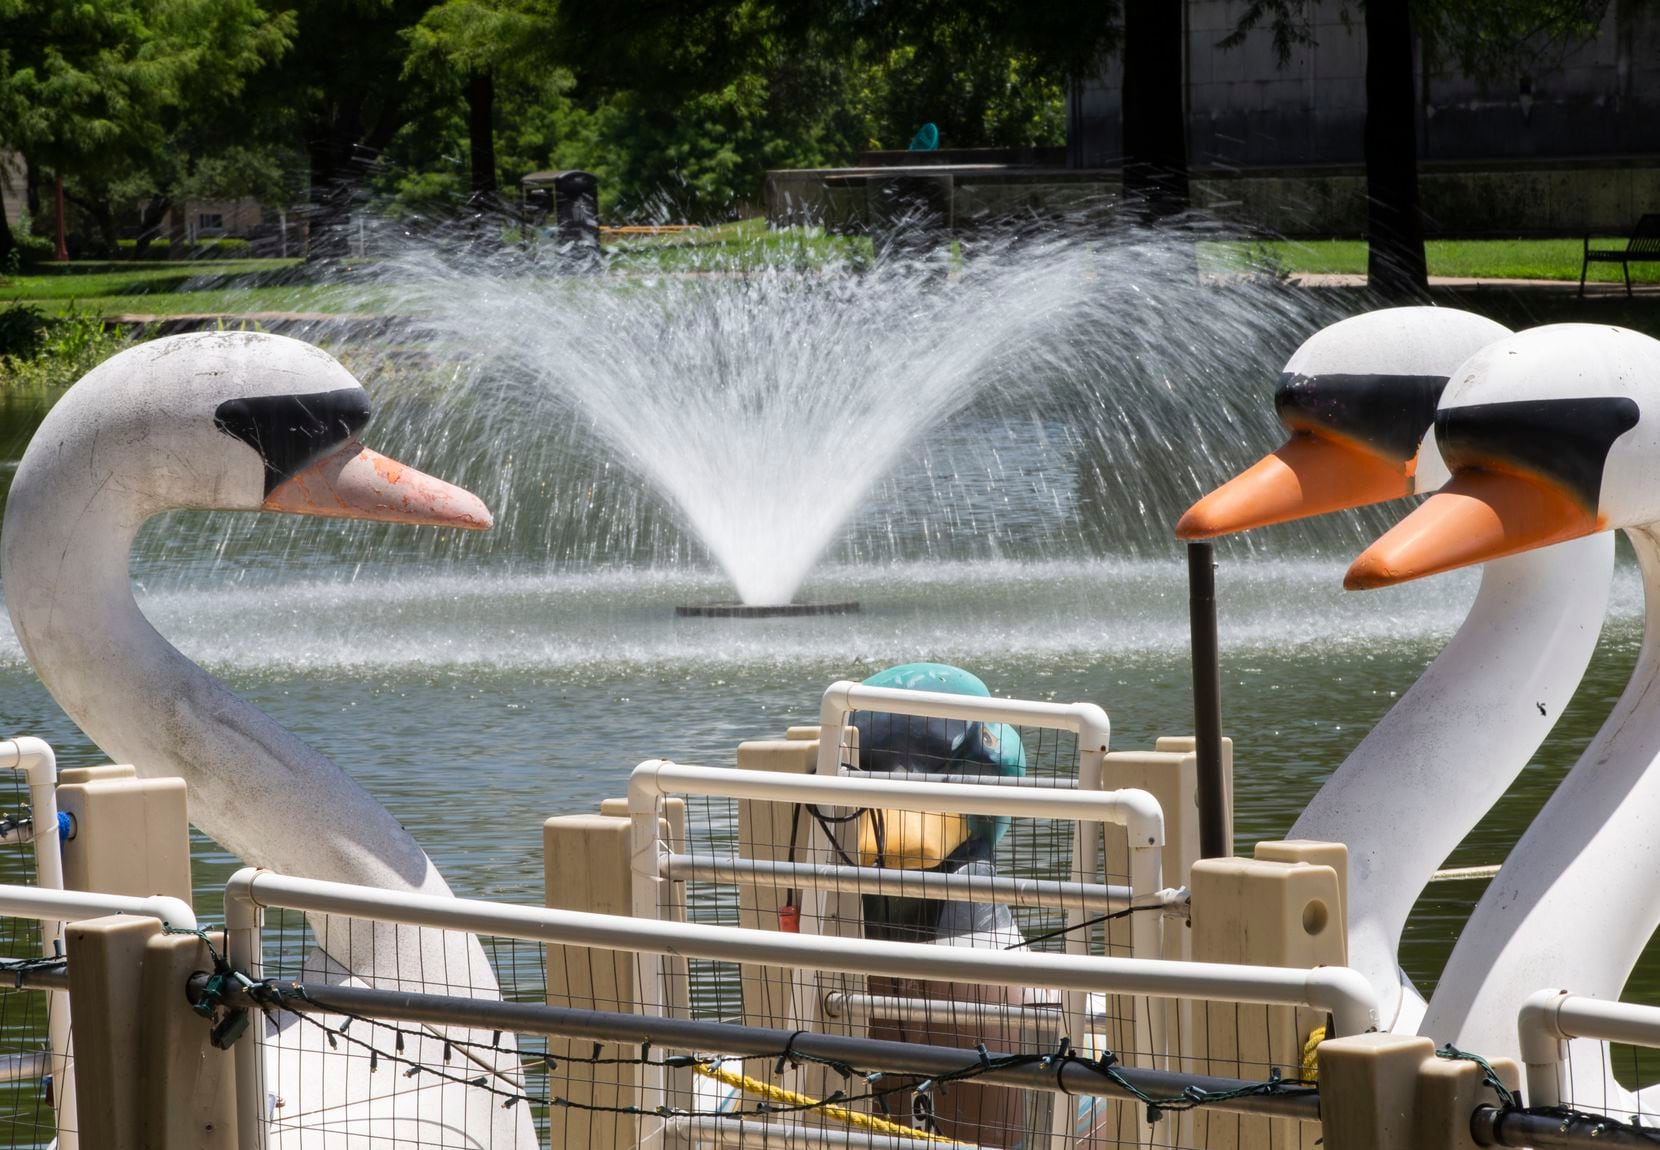 The "paddle boat swans" remained docked at Fair Park on a recent Friday as the park sat...